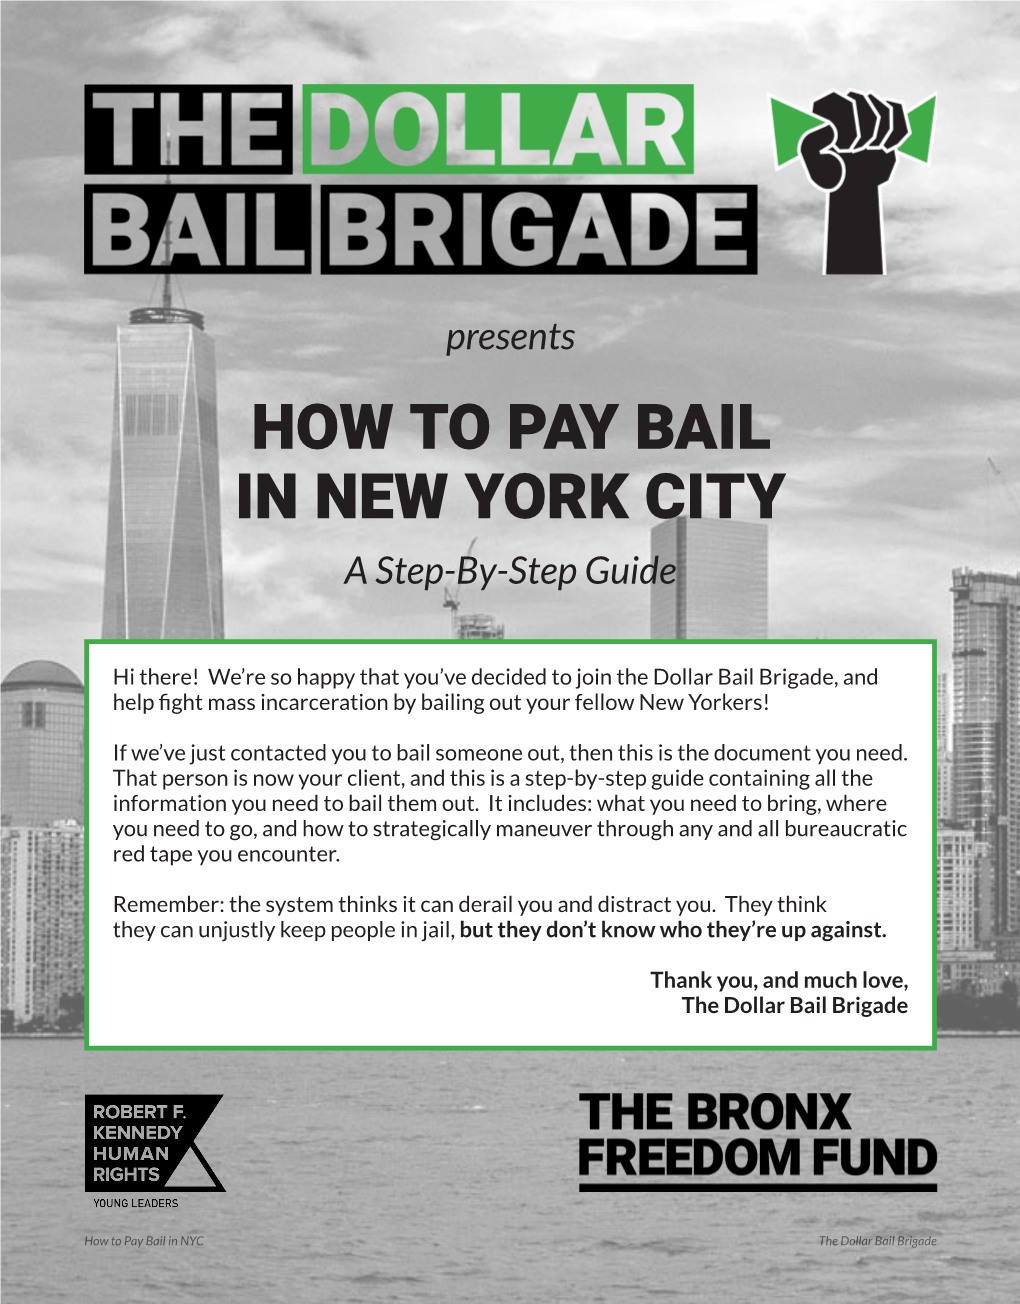 HOW to PAY BAIL in NEW YORK CITY a Step-By-Step Guide